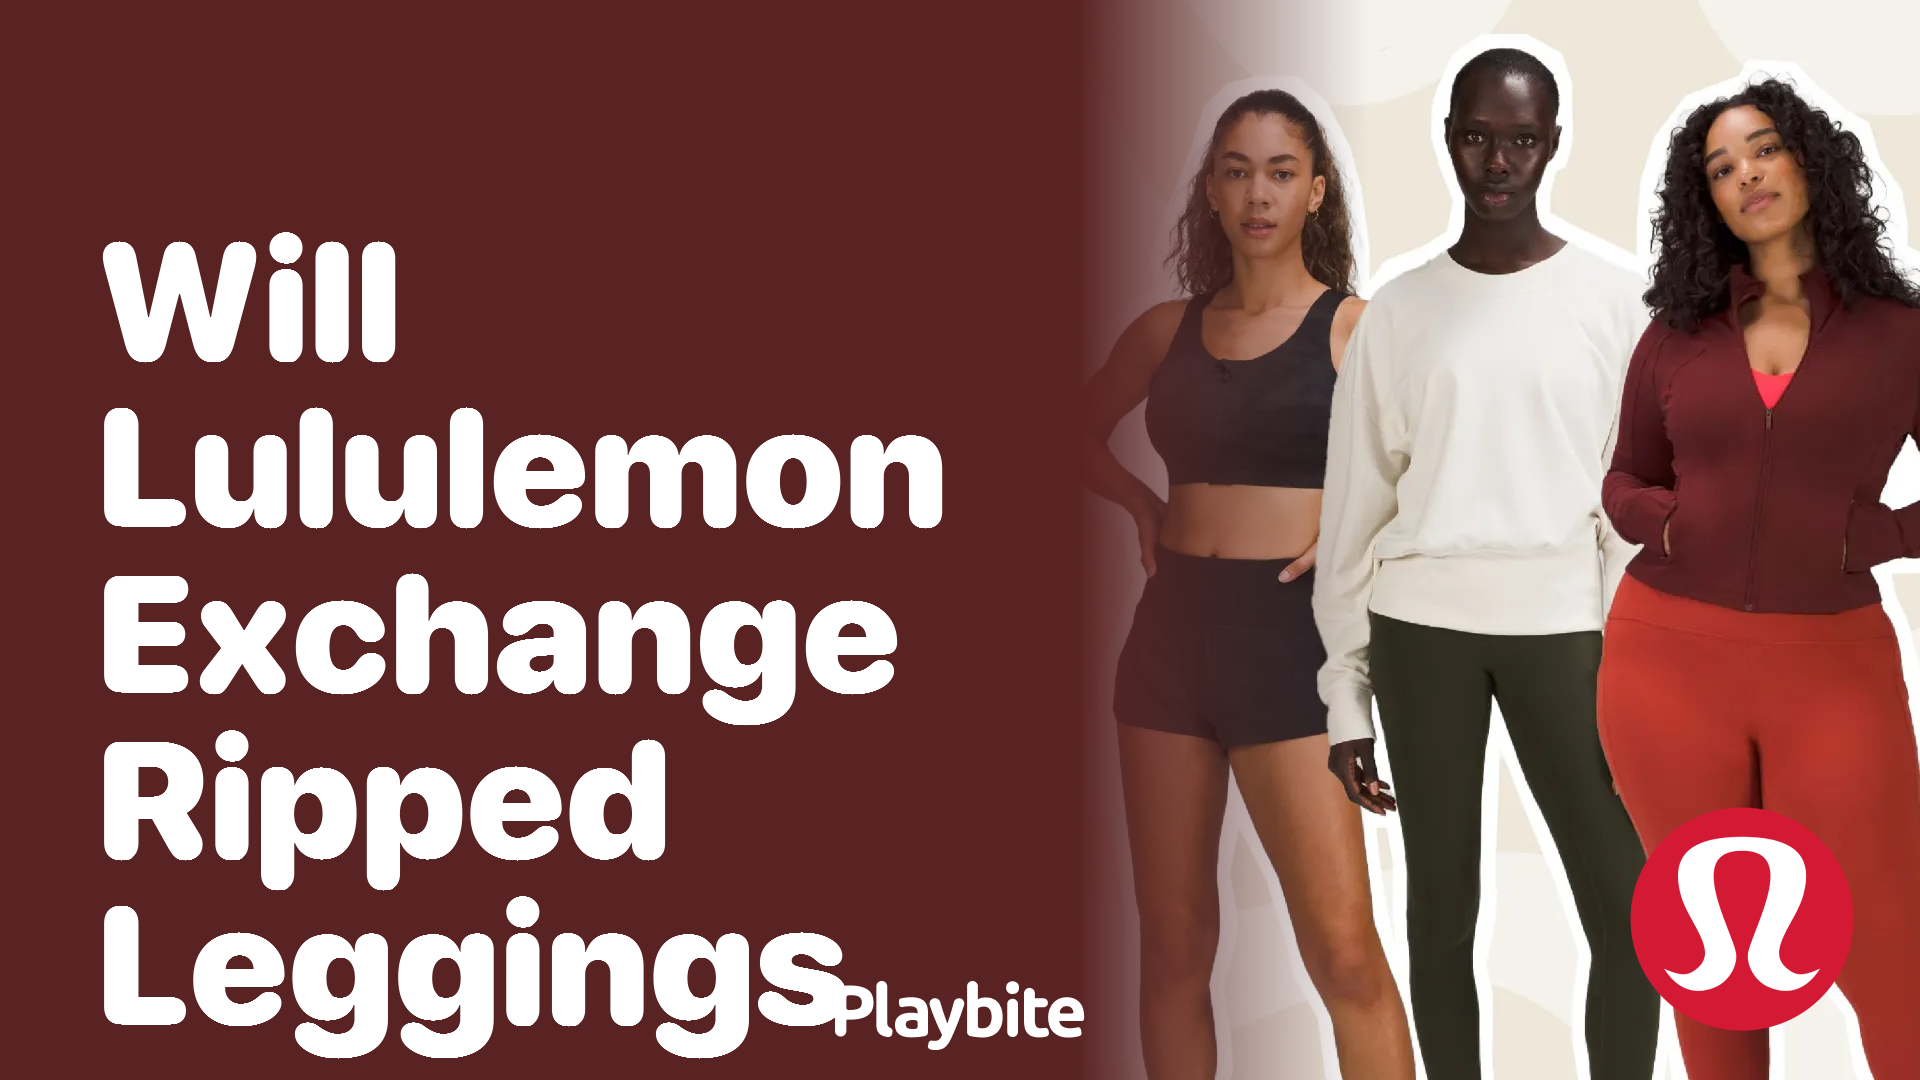 Will Lululemon Exchange Ripped Leggings? Find Out Here! - Playbite